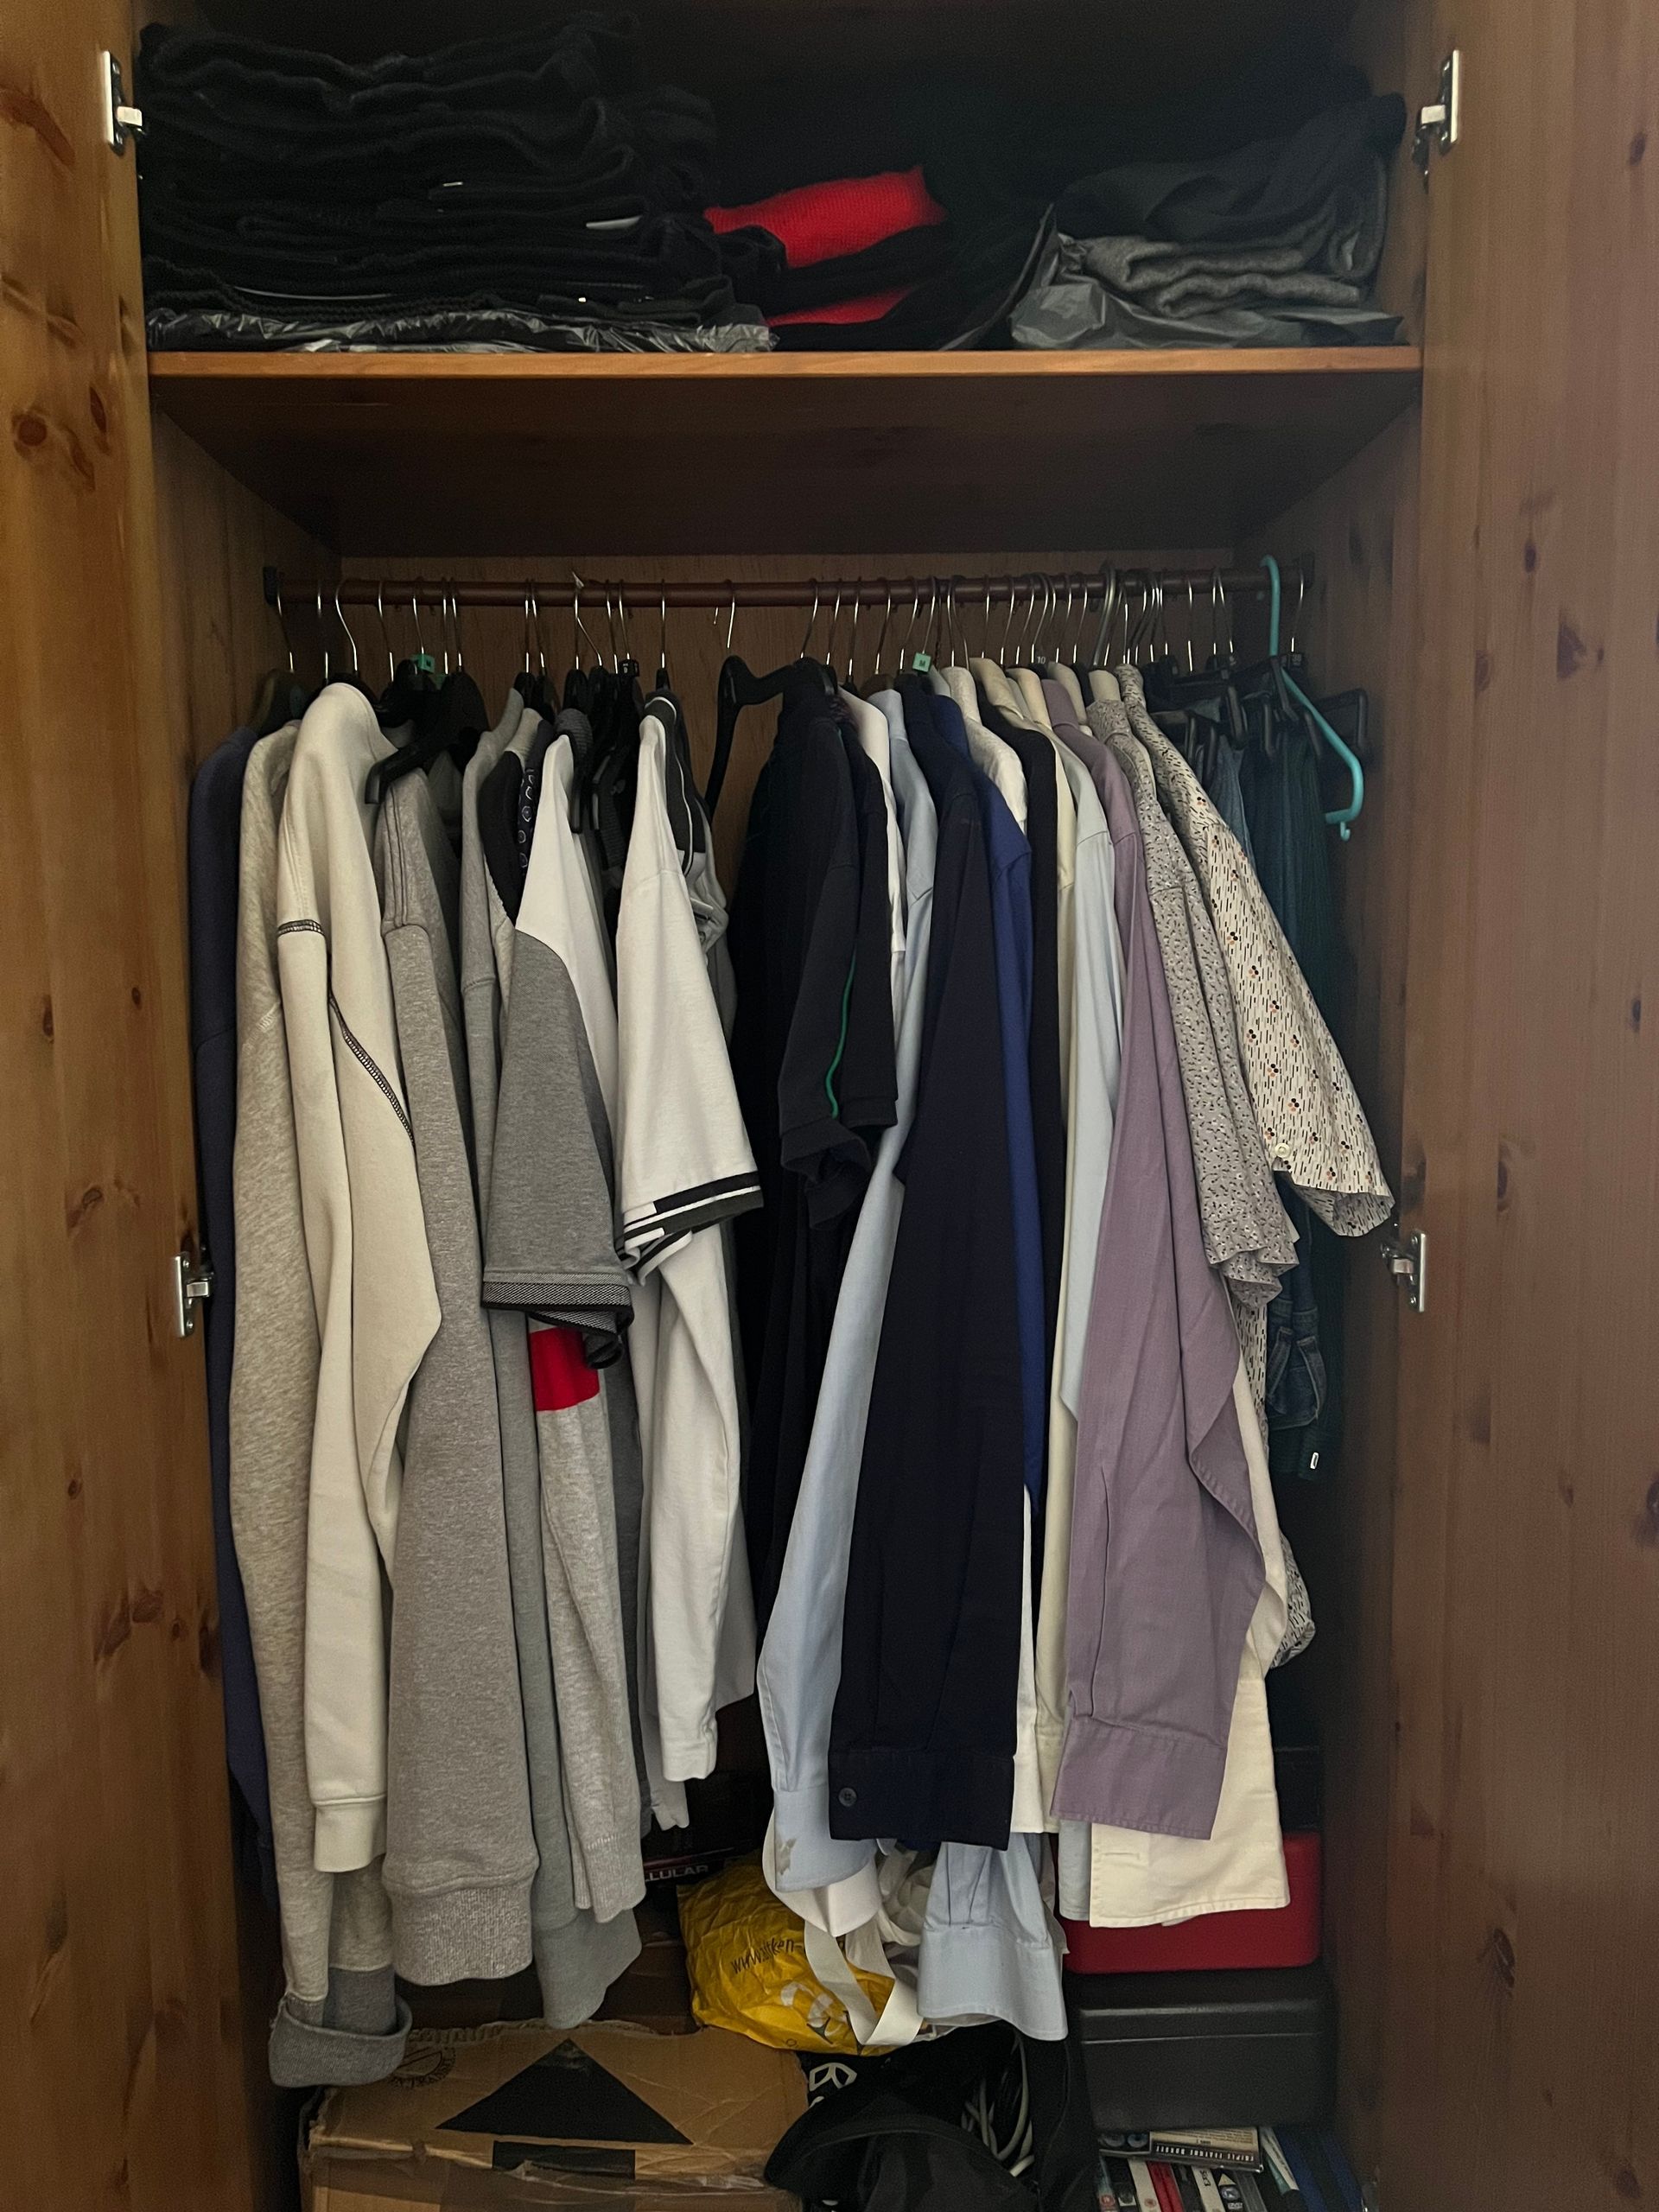 An open wardrobe displaying casual clothing.